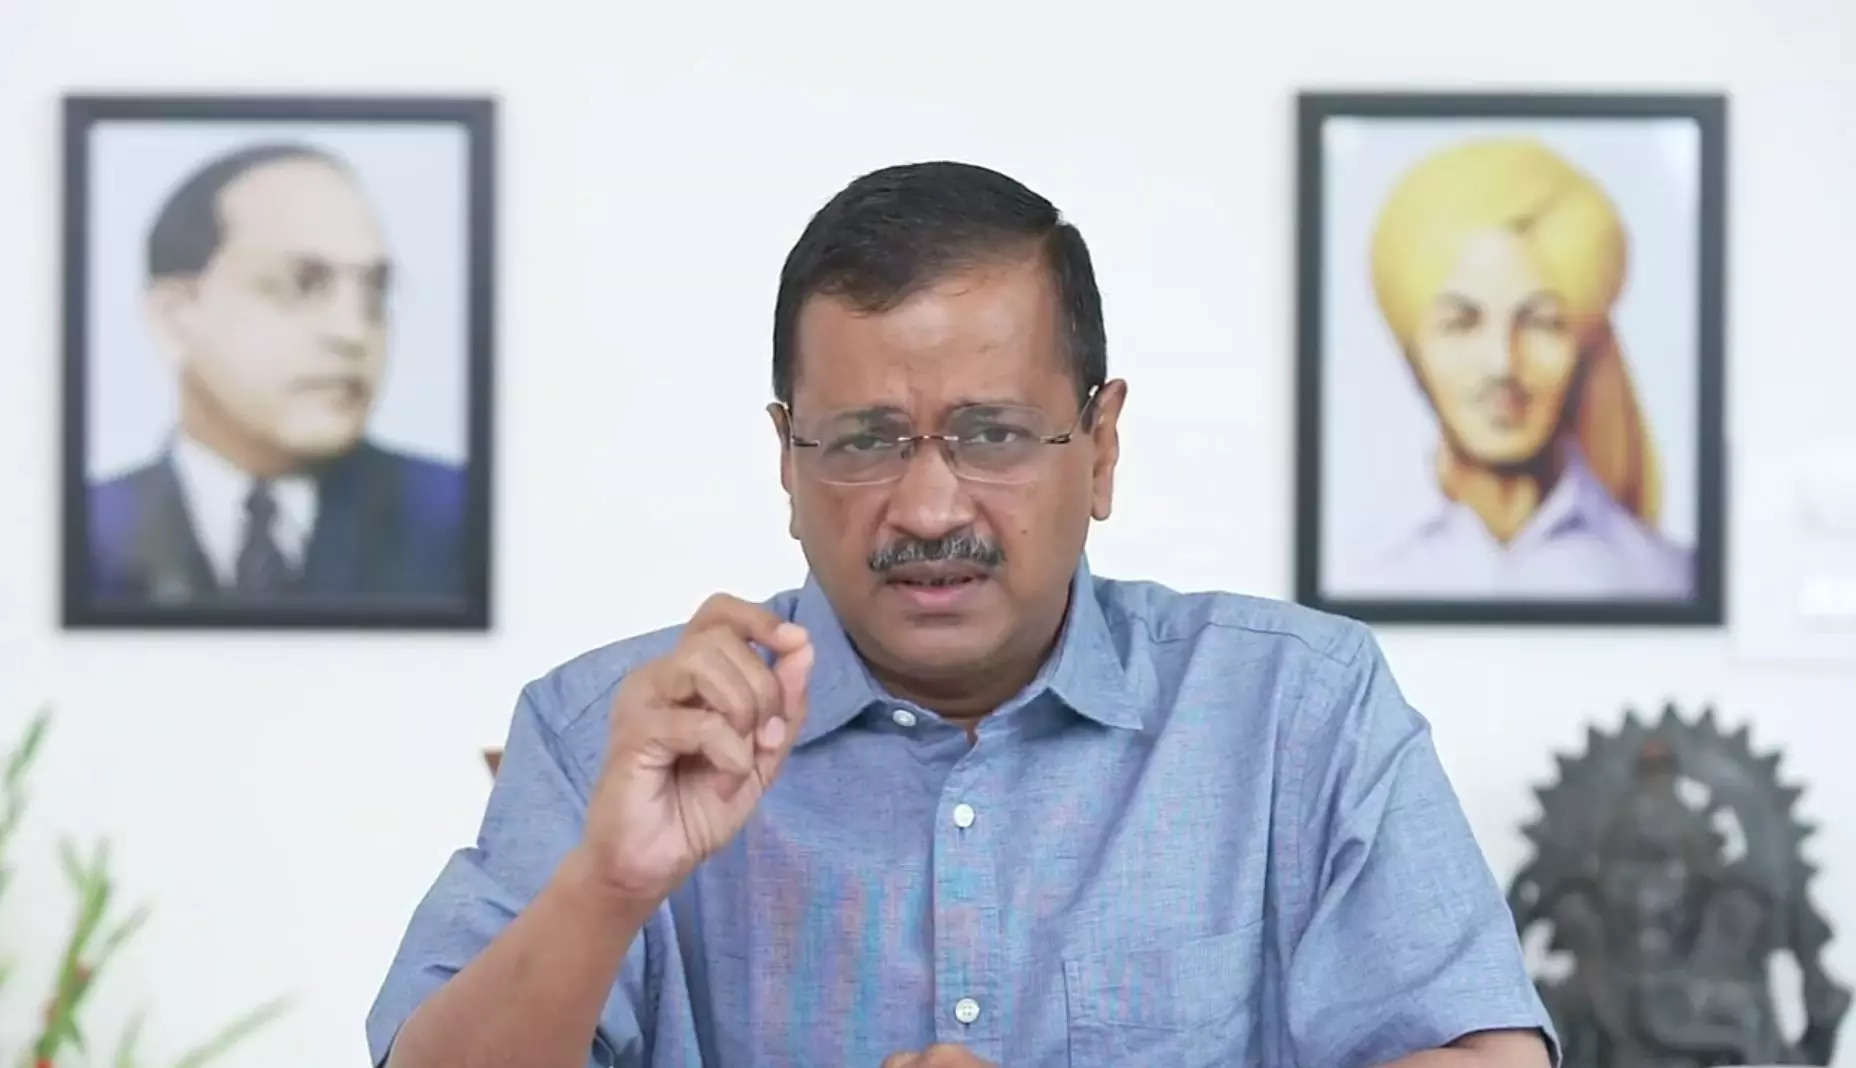 Delhi Excise Policy 2021-22 Honesty patriotism of Manish Sisodia stand vindicated - Kejriwal after CBI search